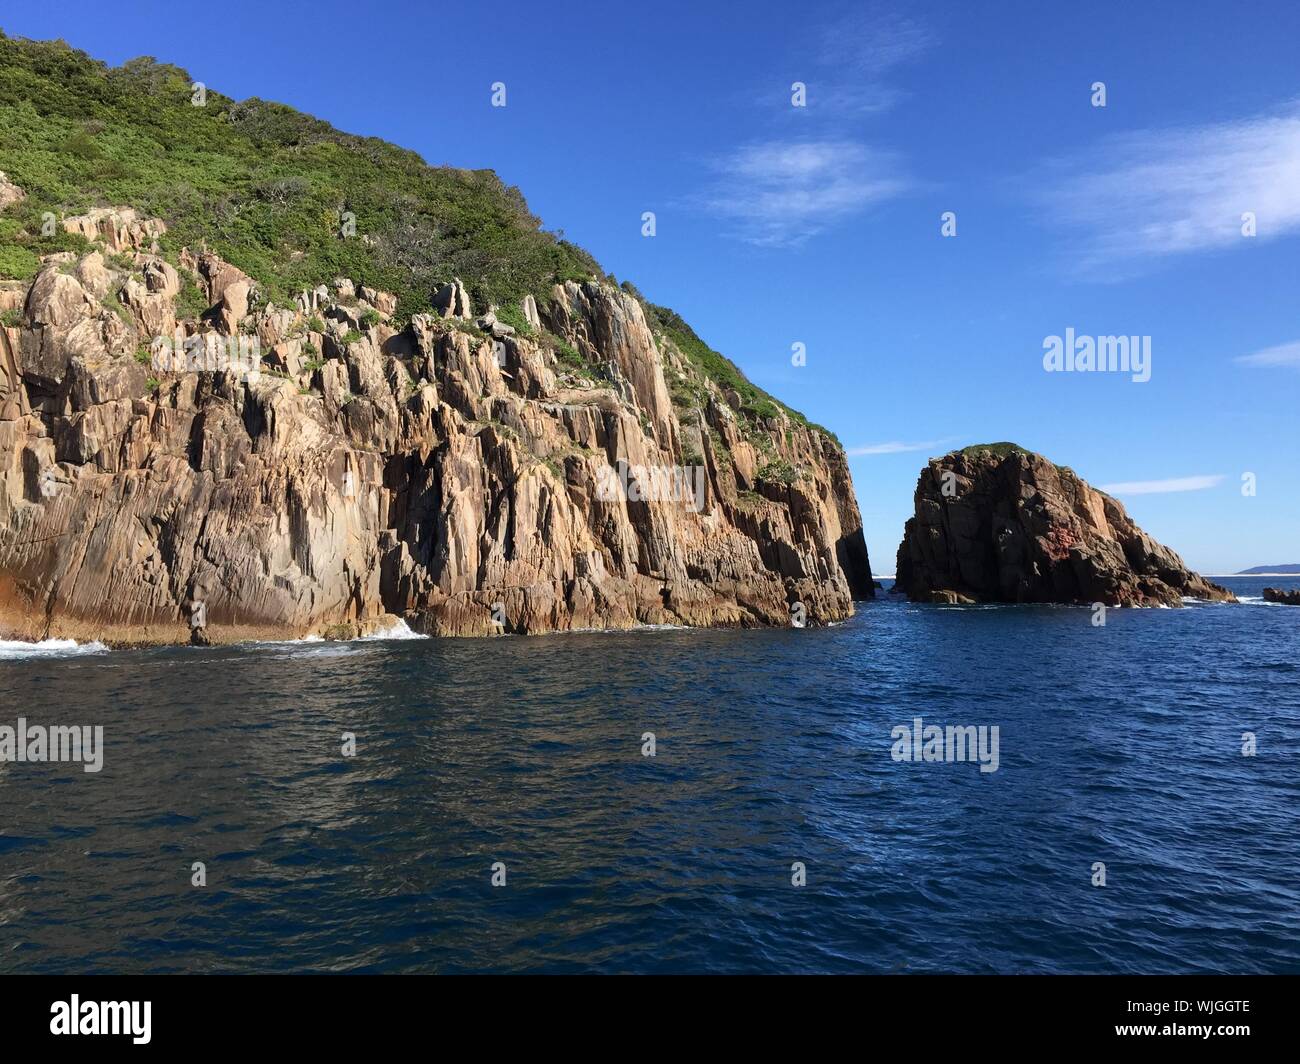 Idyllic Shot Of Rocky Cliffs In Sea Against Nelson Bay Stock Photo